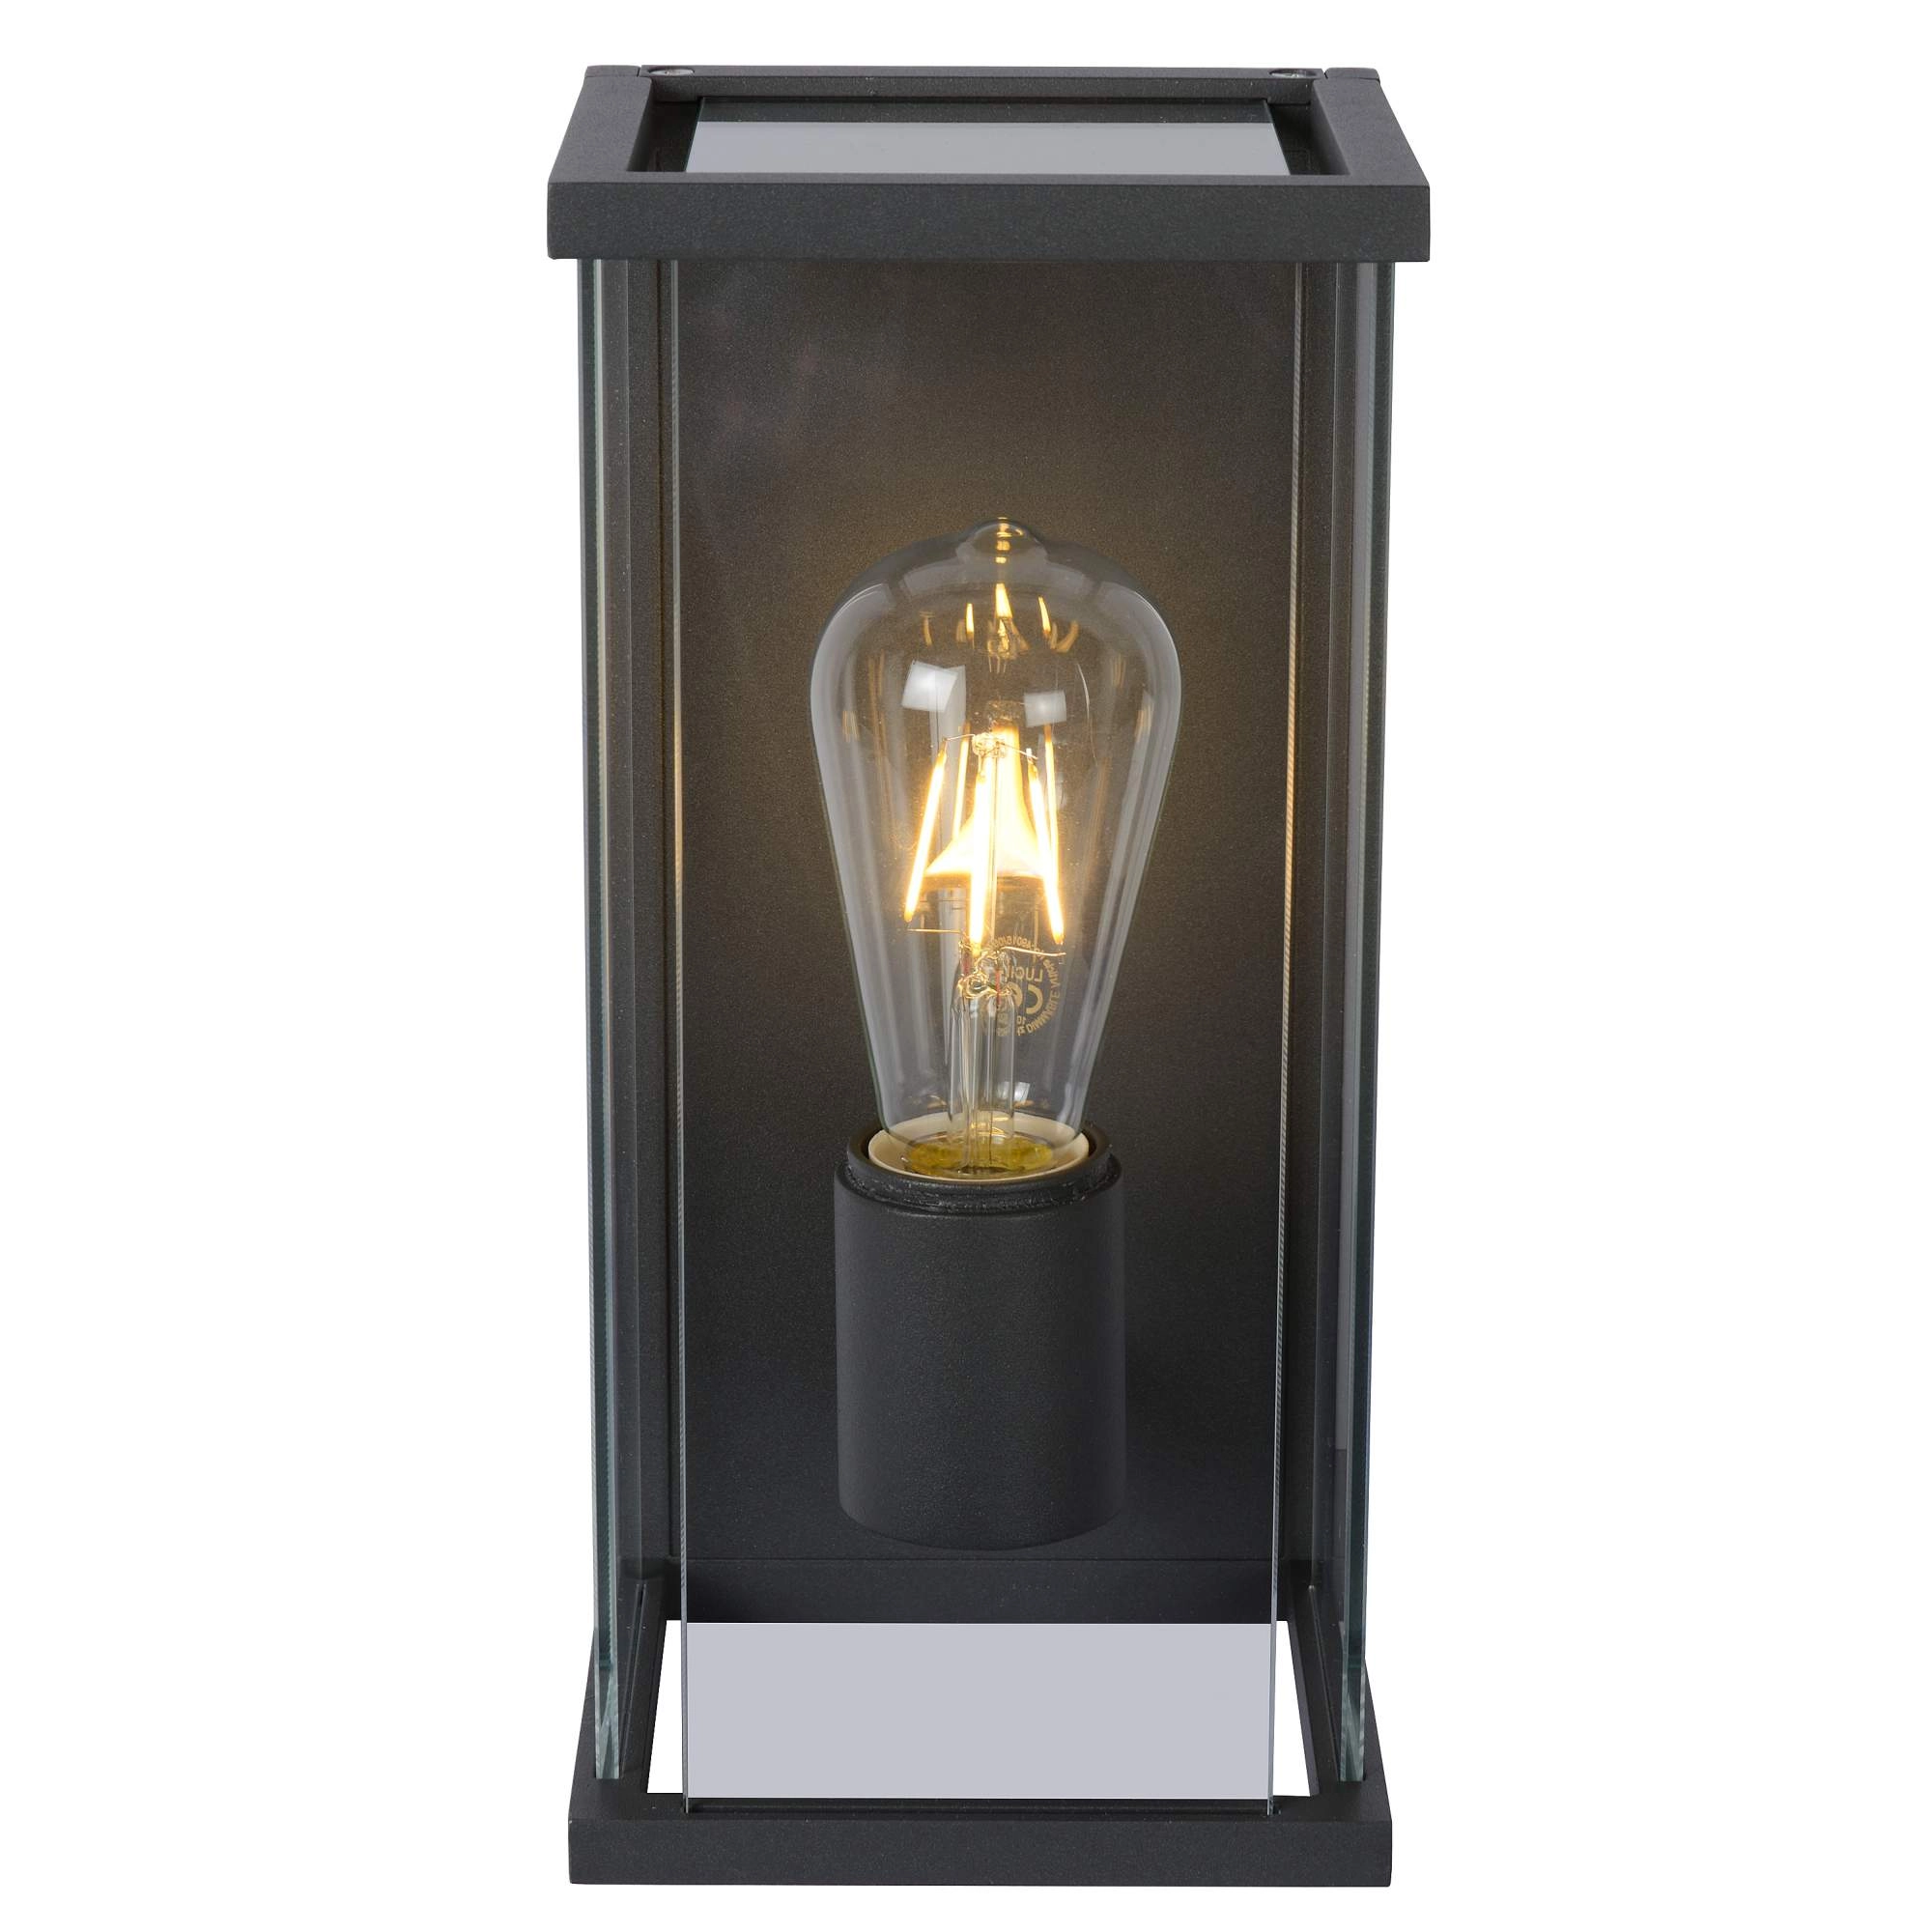 LU 27885/01/30 Lucide CLAIRE - Wall light Outdoor - 1xE27 - IP54 - Anthracite